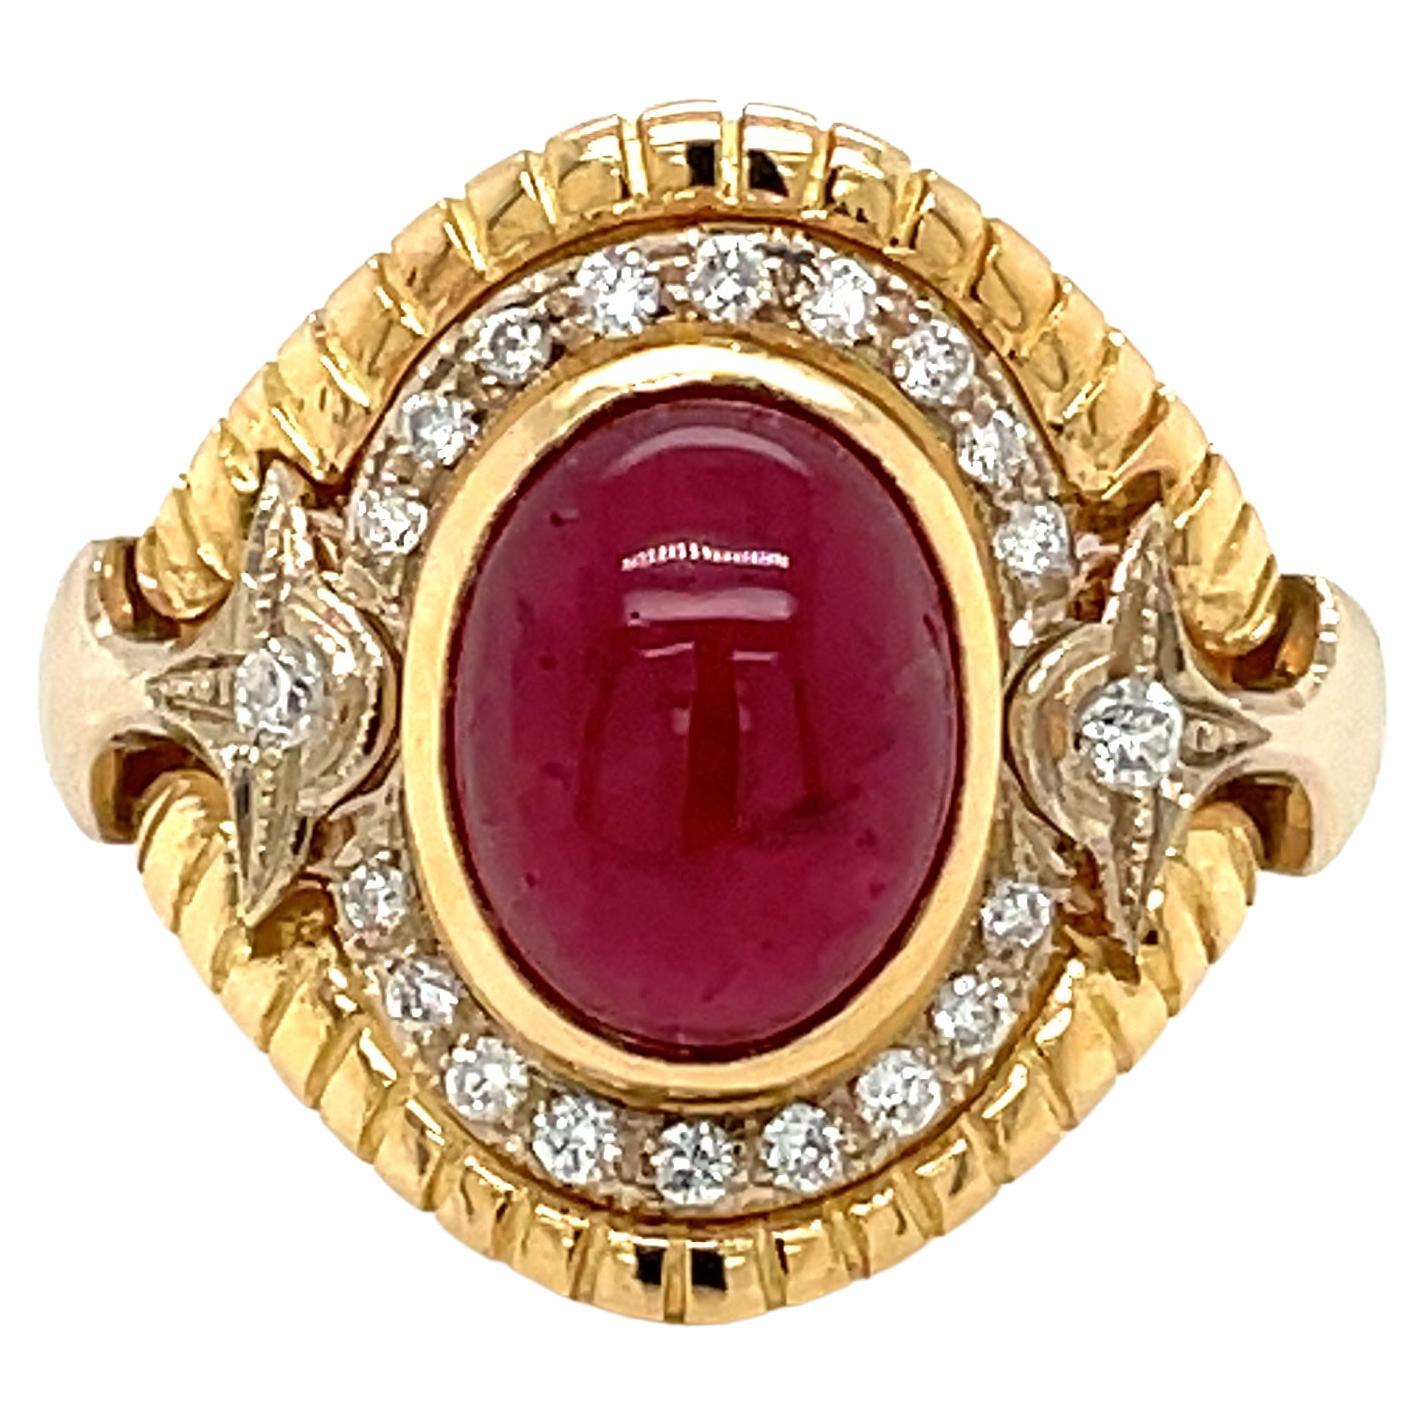 Retro 5 Carat Ruby Diamond Cocktail Ring For Sale